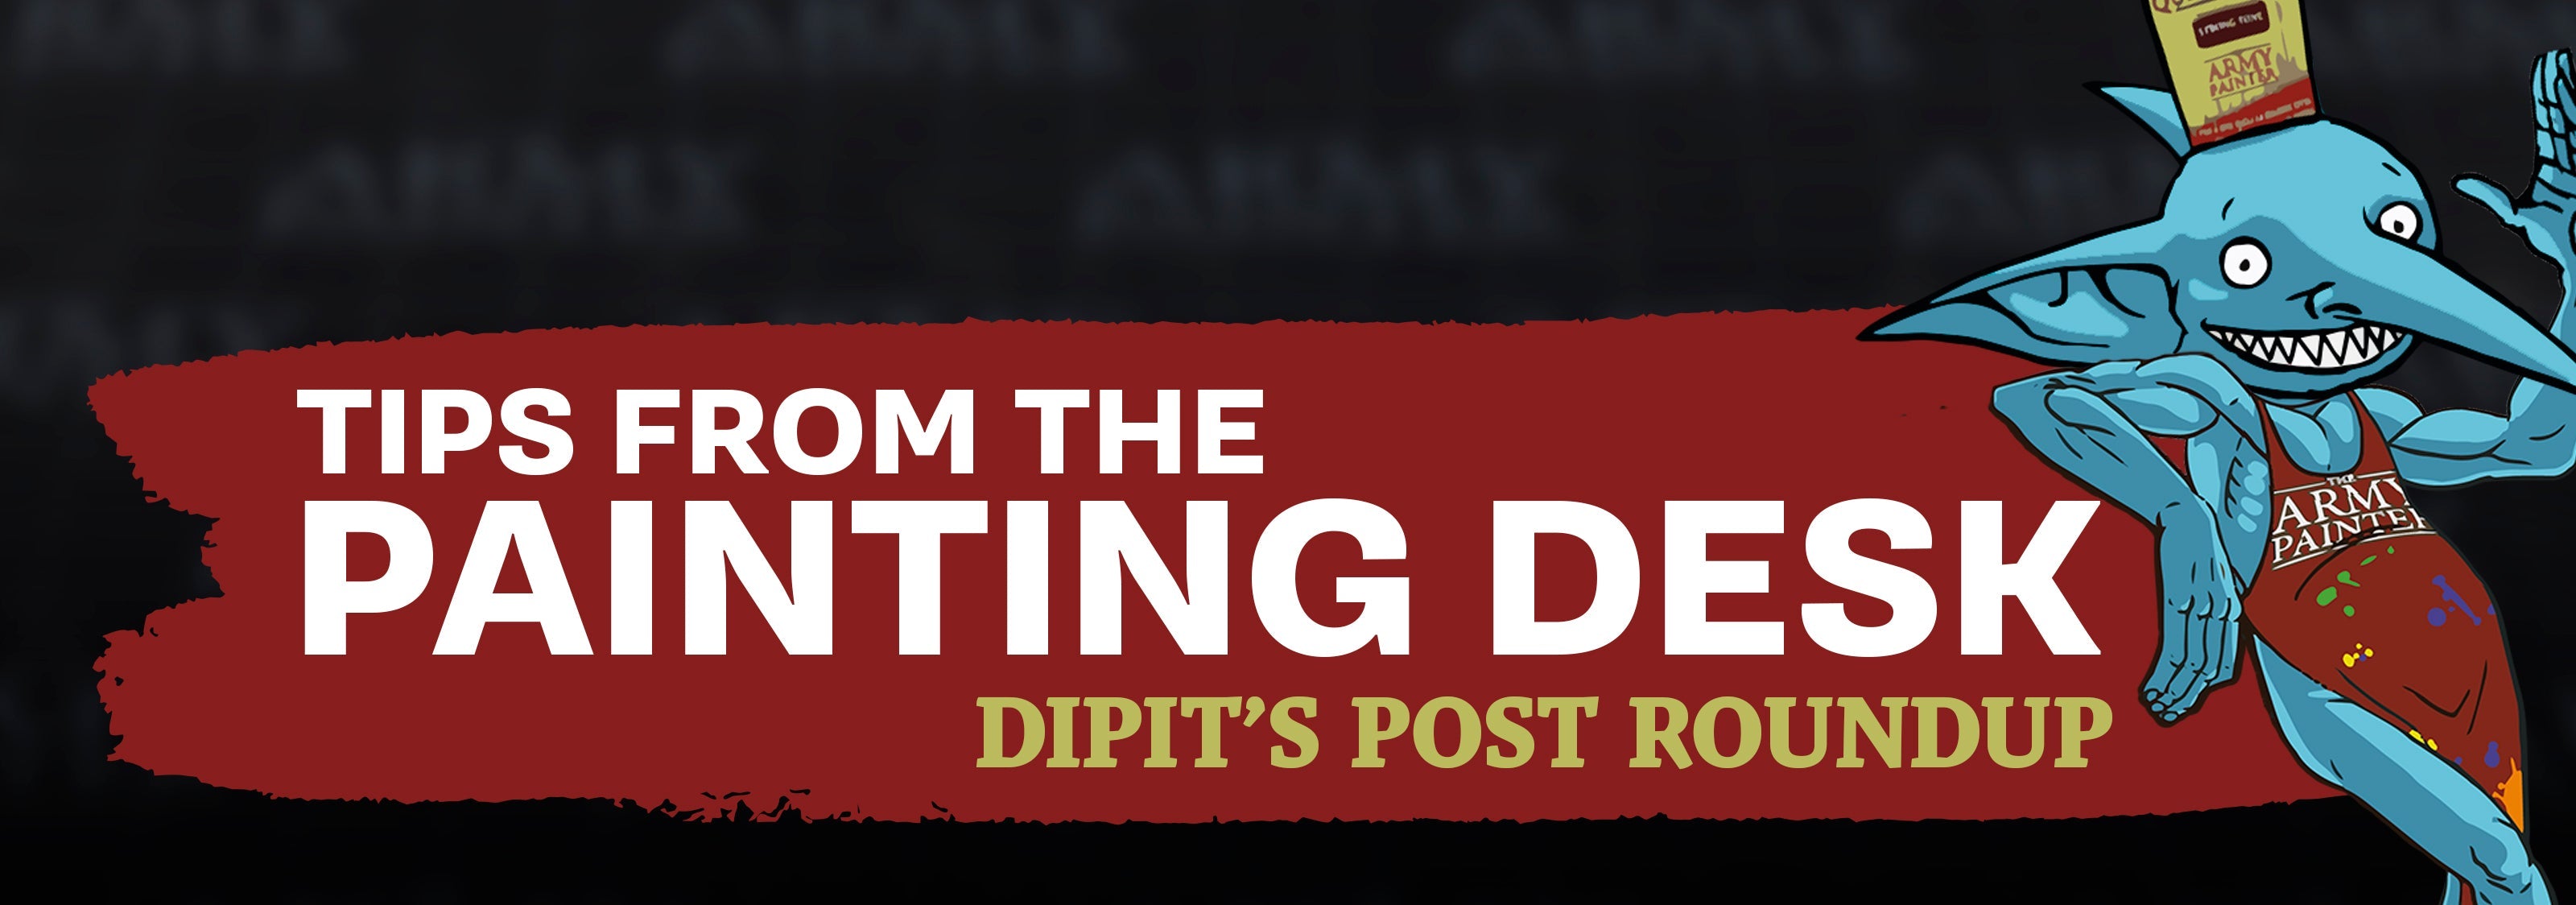 Tips From The Painting Desk: Dipit's Post Roundup